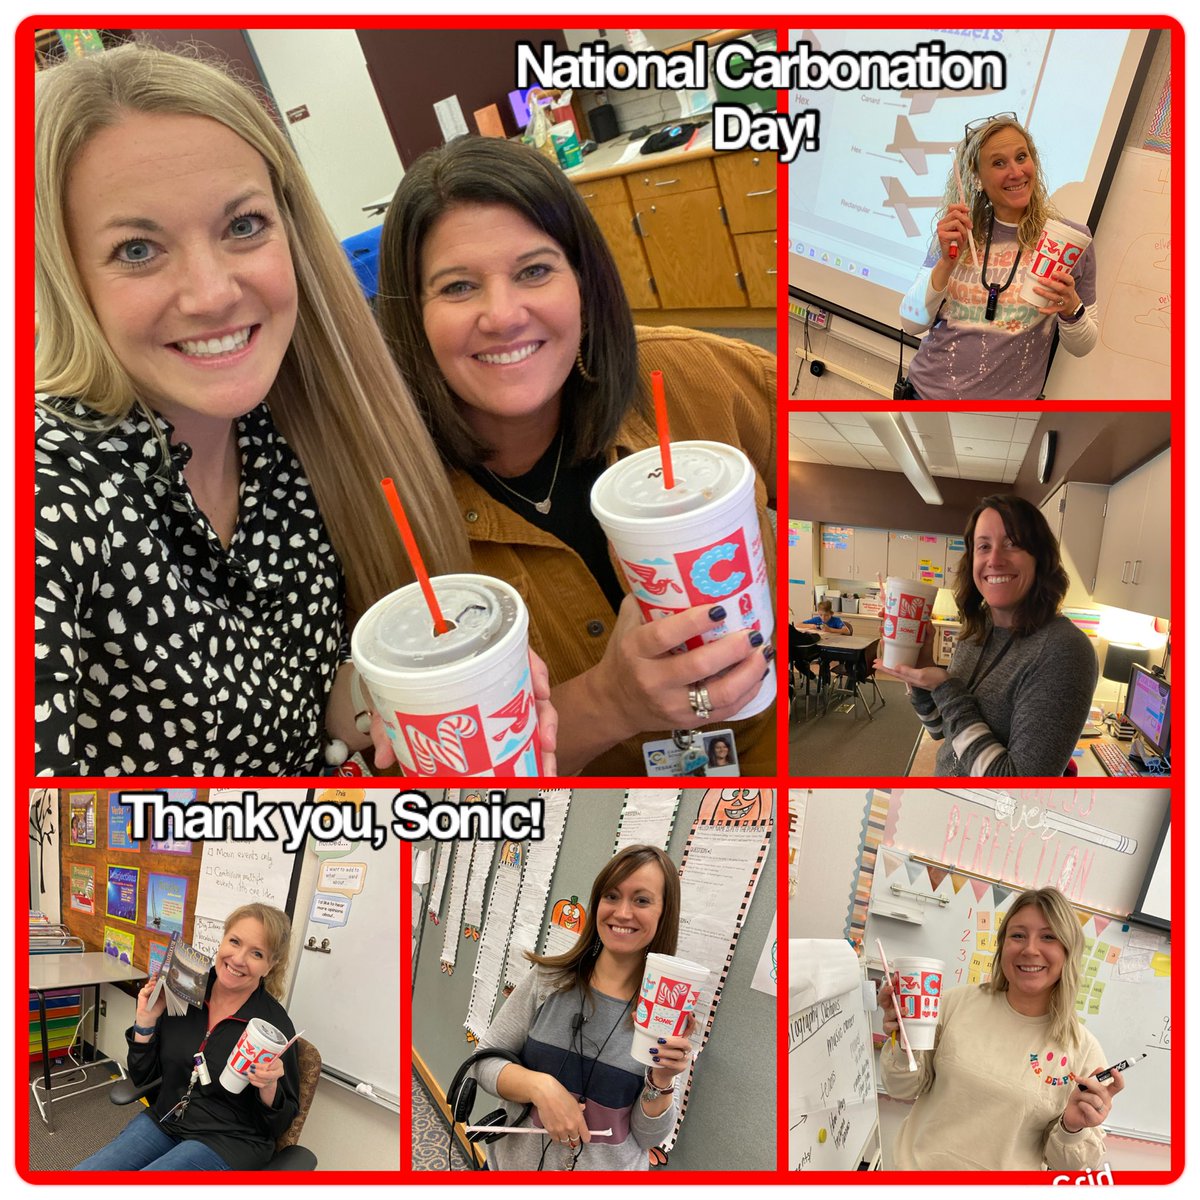 Thank you, @sonicdrivein for making our teachers happy today for National Carbonation day!